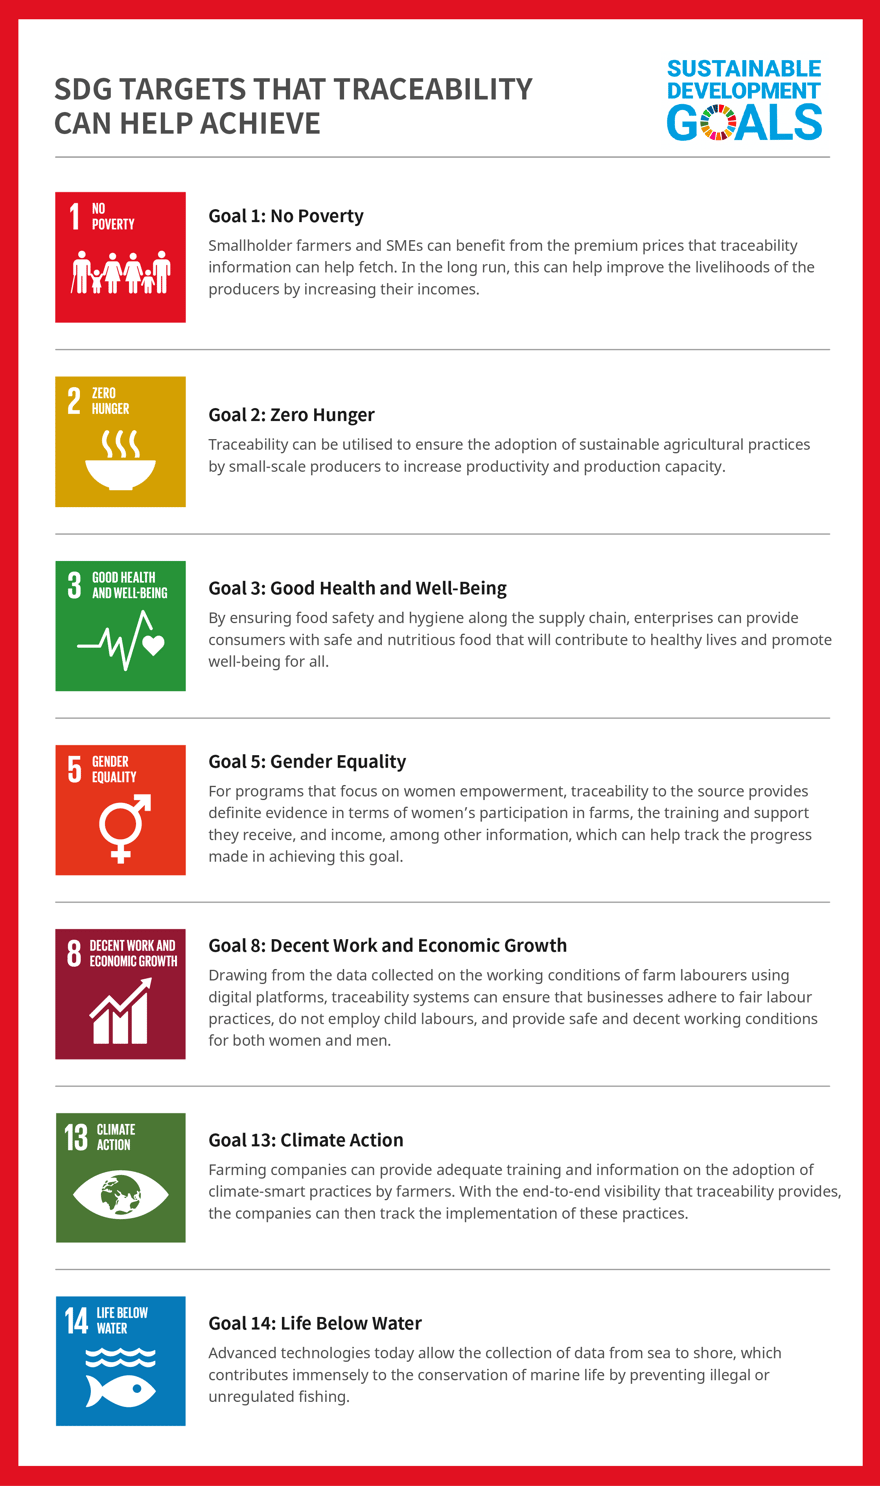 traceability in agriculture to achieve sustainable development goals-infographic